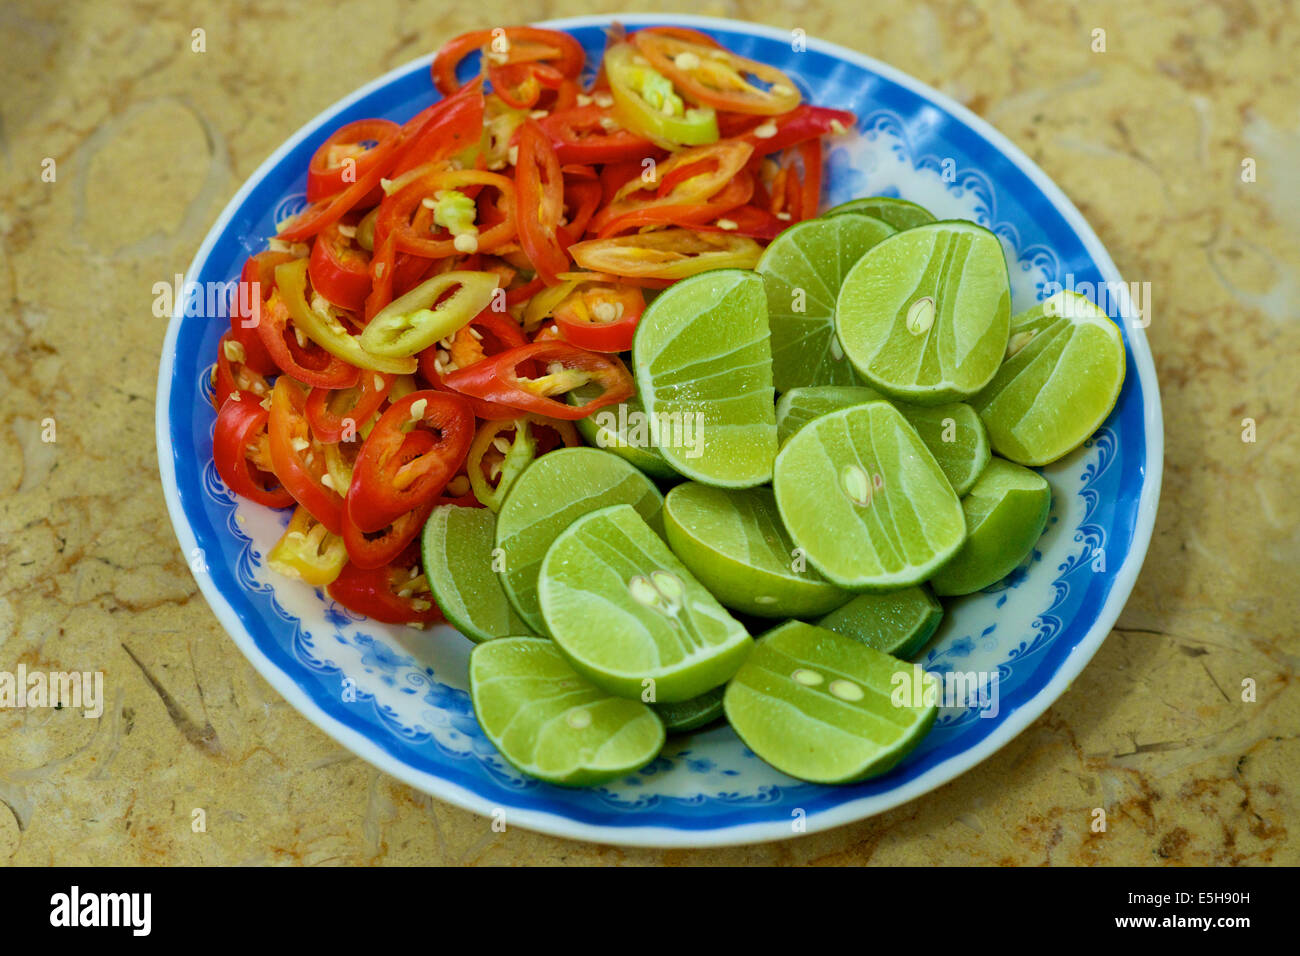 Plate with green limes and red hot chilly peppers in Vietnam Stock Photo